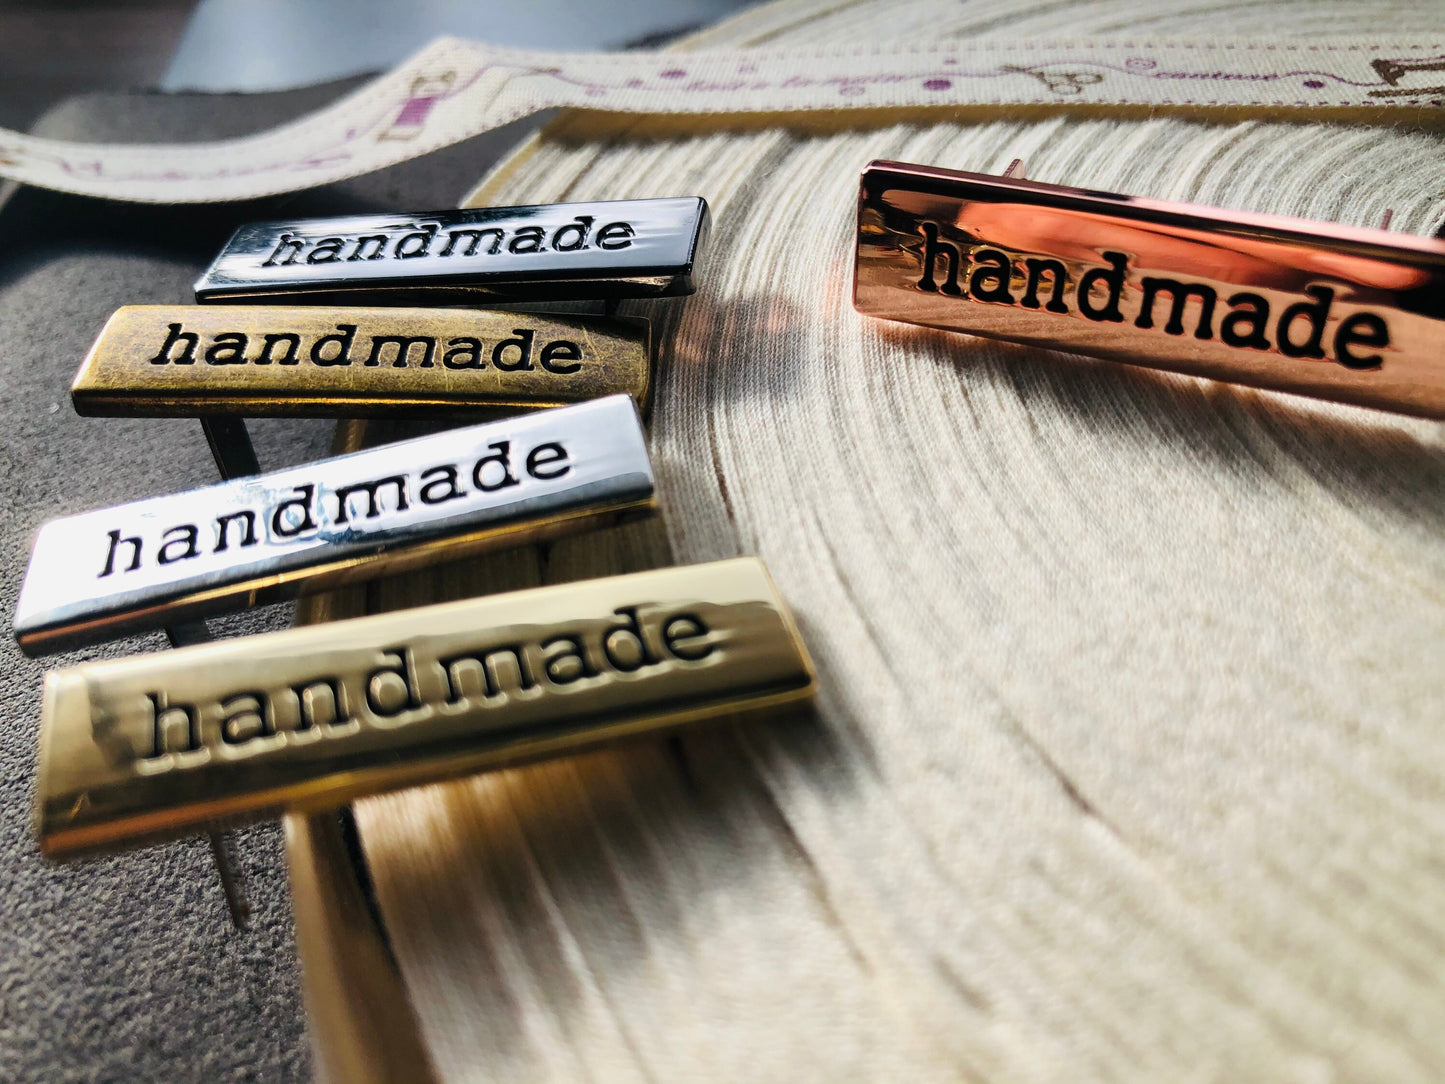 Metal Handmade Labels for Handmade Bags, Clothes, Leather, Knitting,  Crochet and Craft Projects 